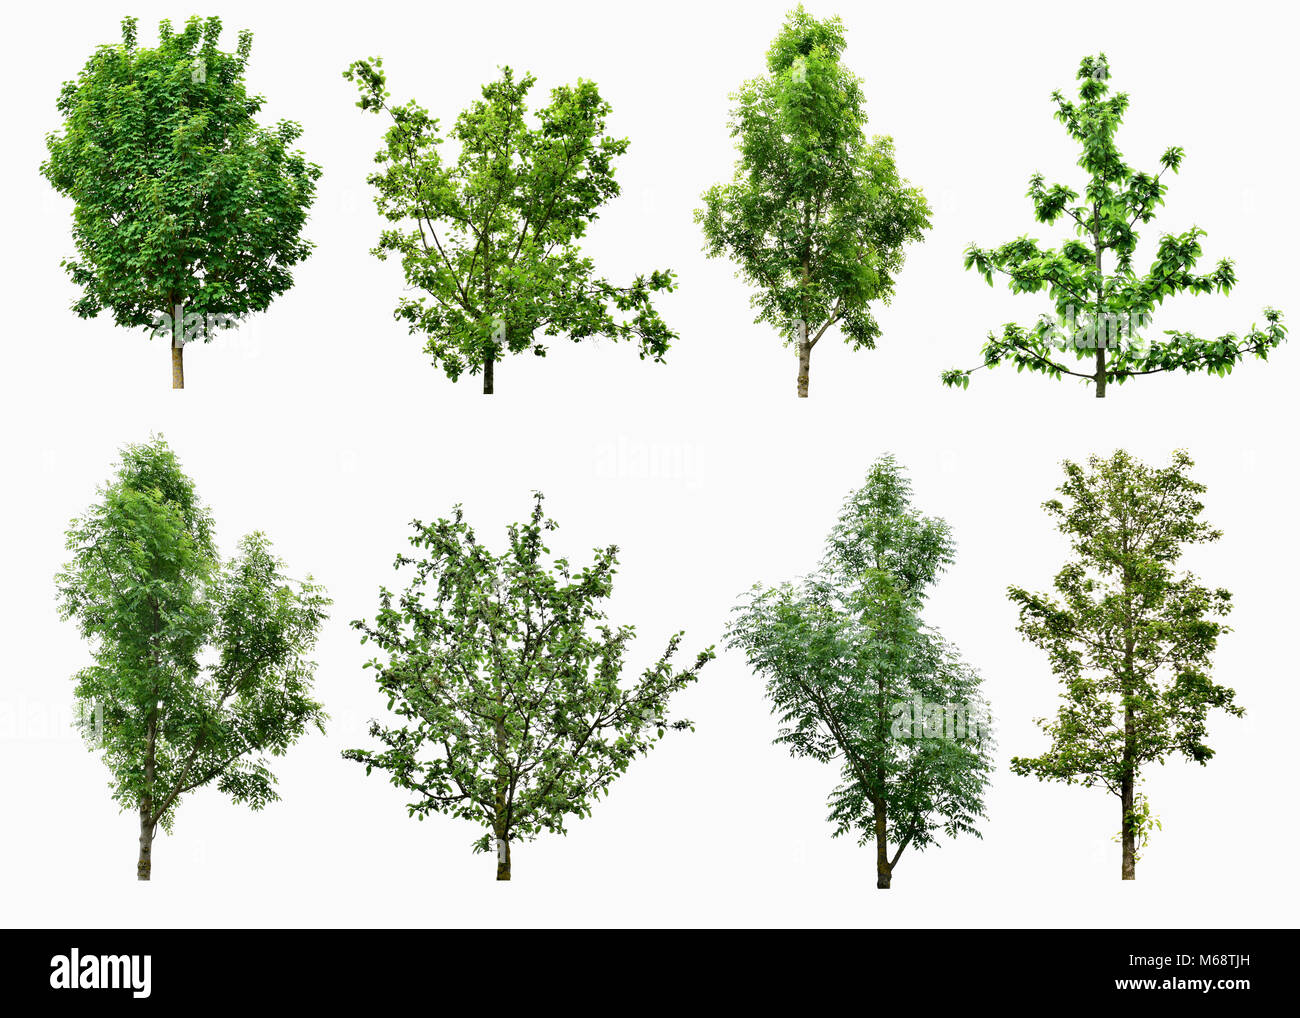 Collection of trees isolated on white background. Stock Photo